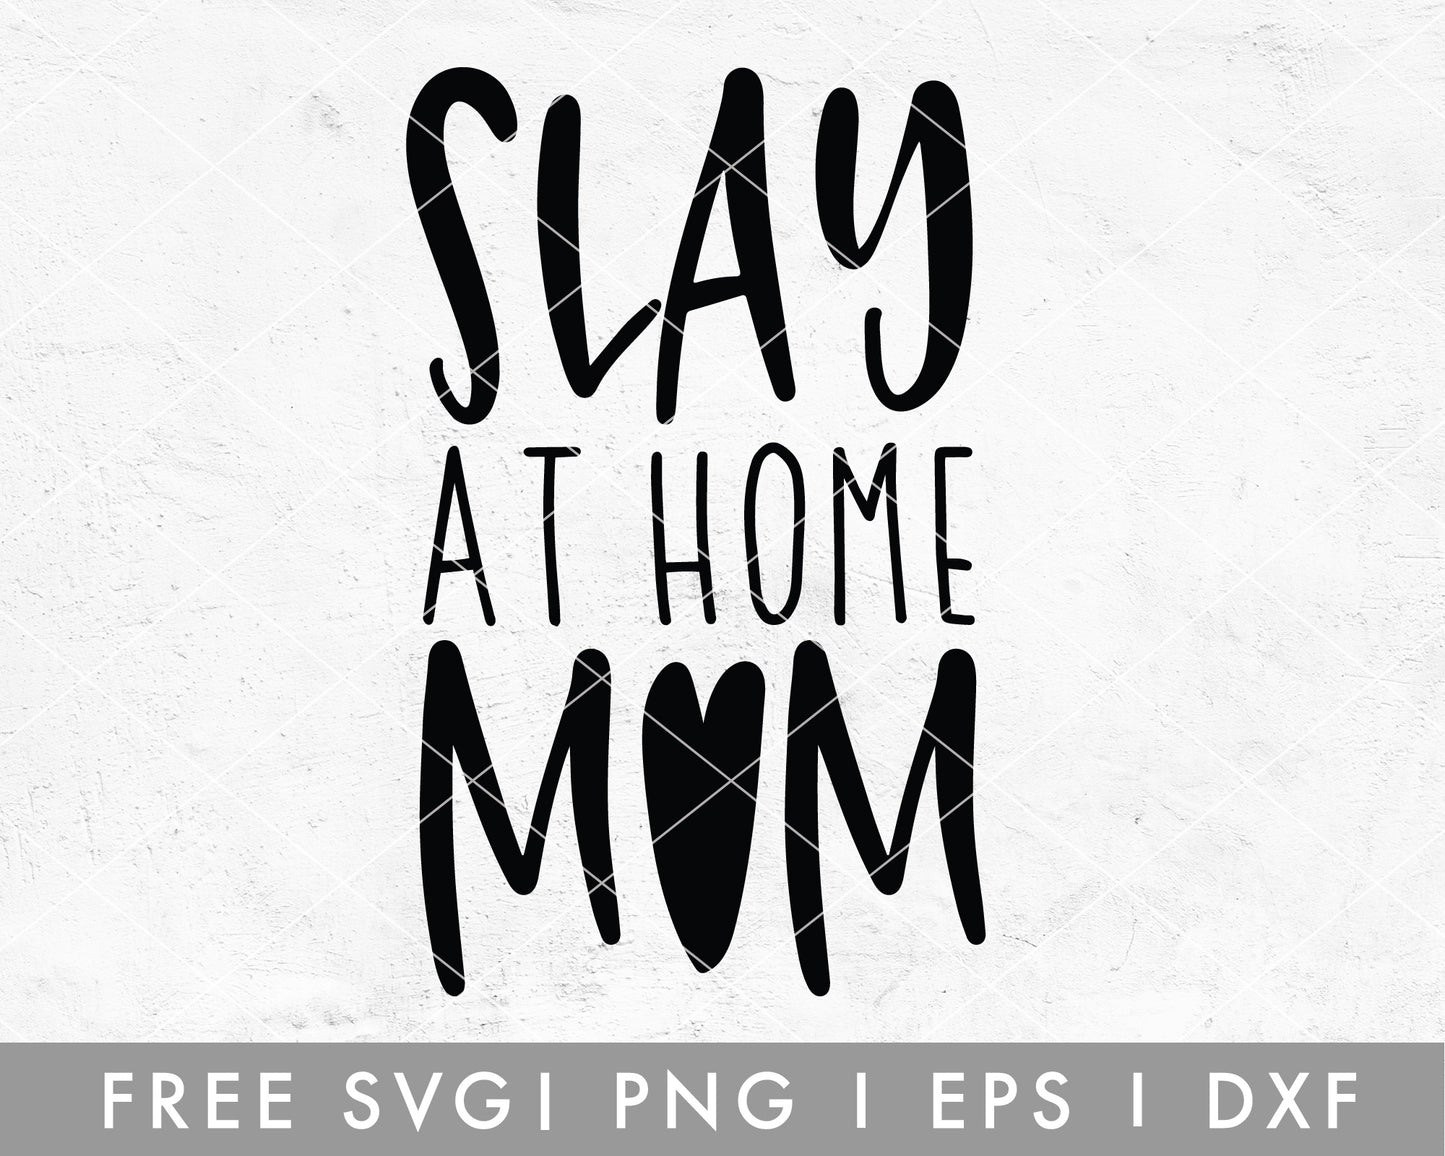 FREE Slay At Home Mom SVG Cut File for Cricut, Cameo Silhouette | Free SVG Cut File